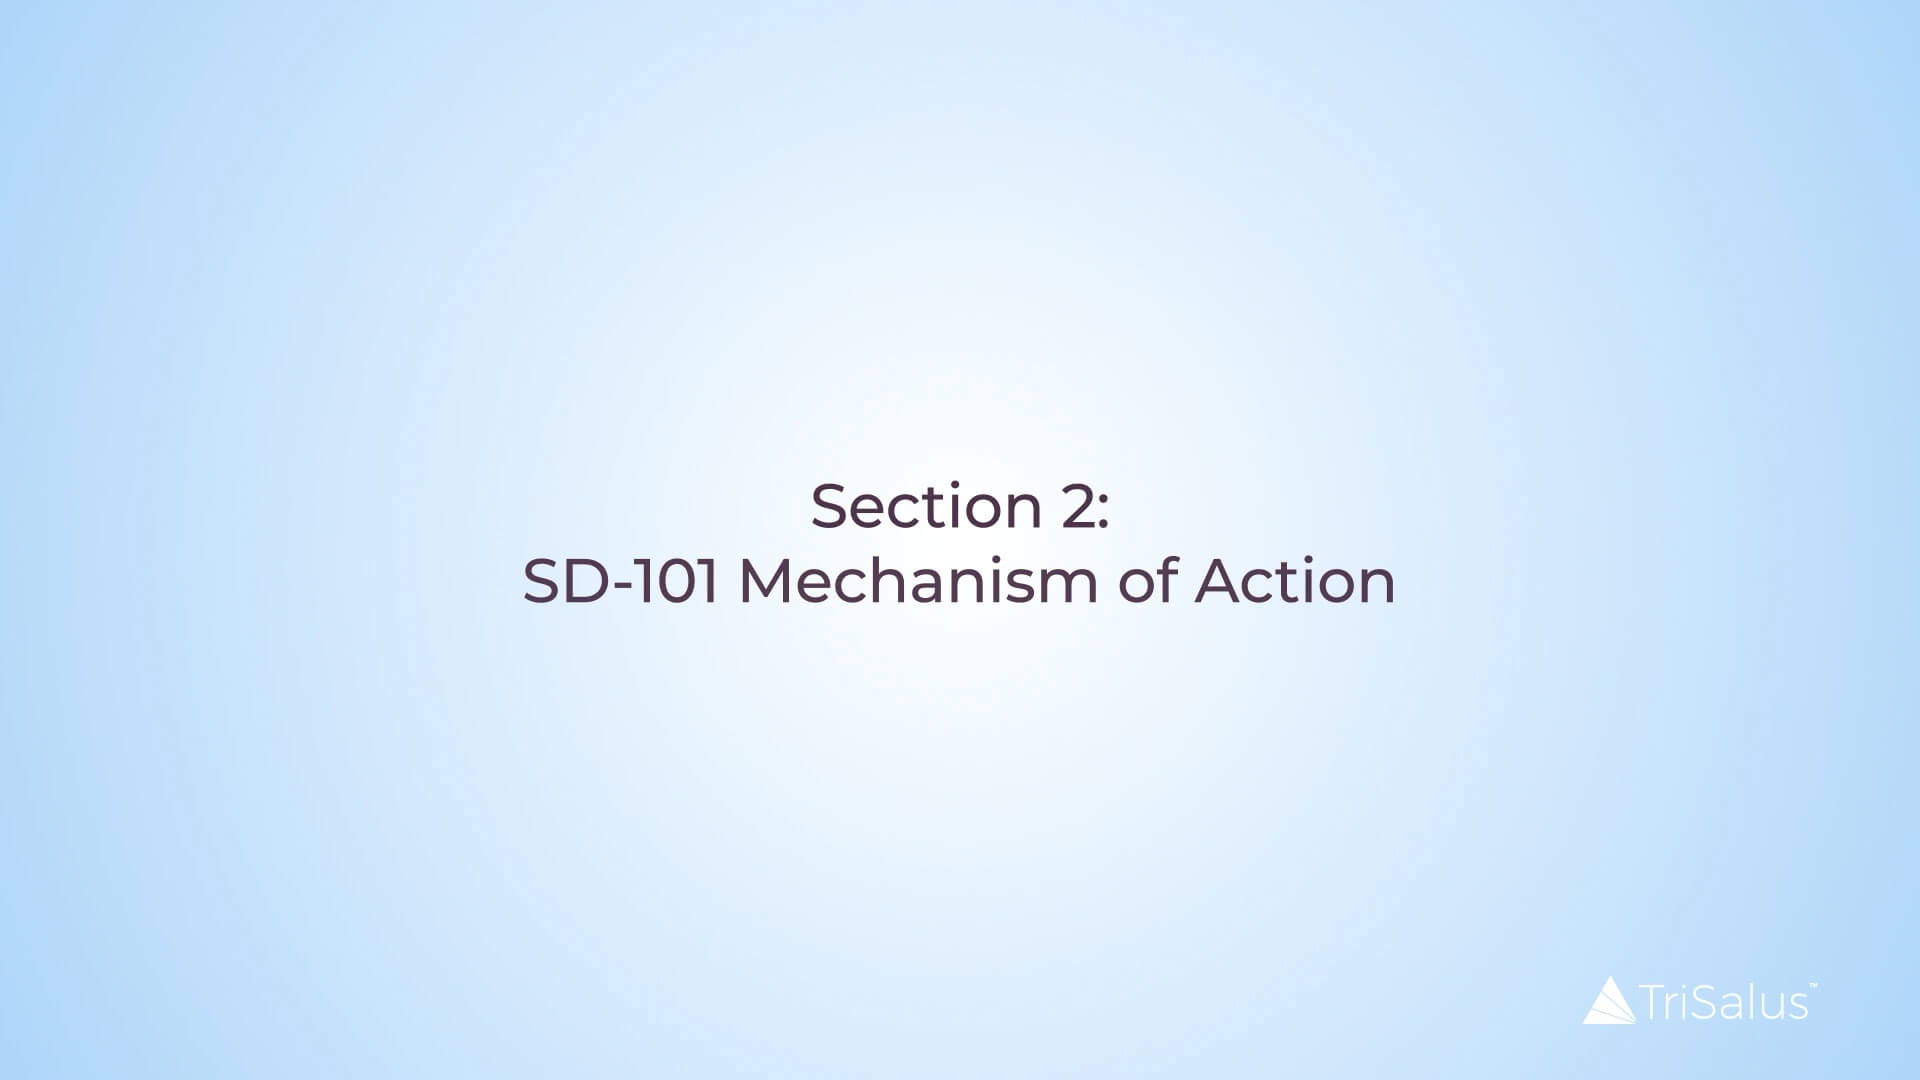 Video Thumbnail with text: Section 2: SD-101 Mechanism of Action